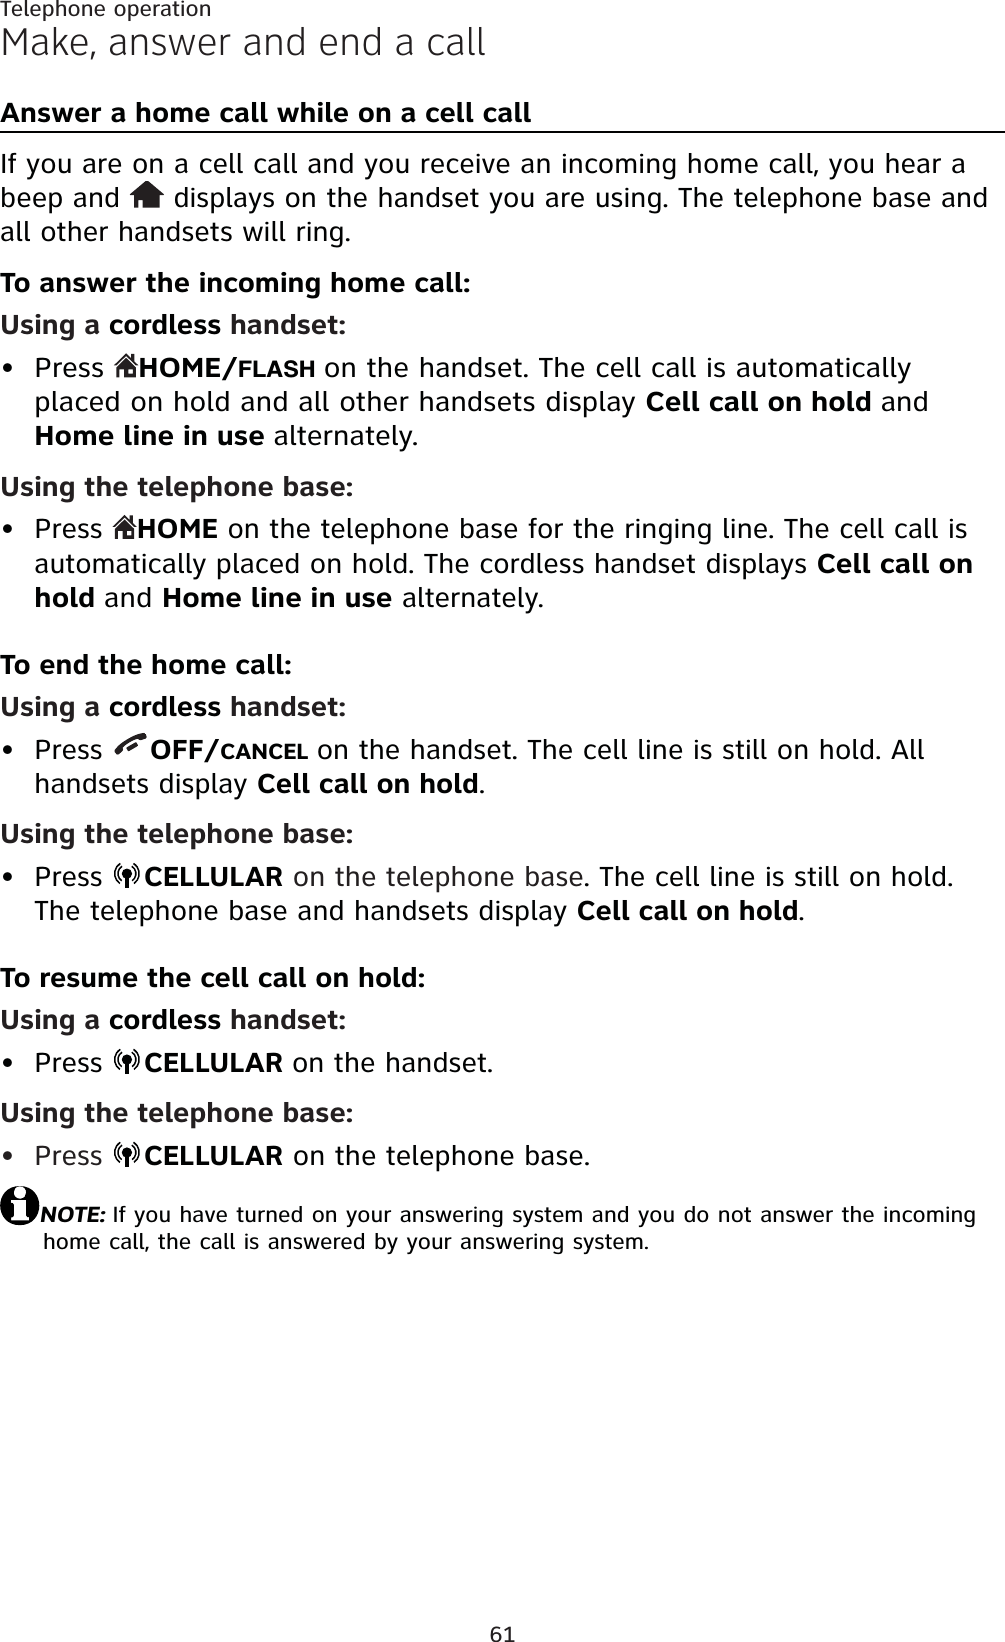 61Telephone operationMake, answer and end a callAnswer a home call while on a cell callIf you are on a cell call and you receive an incoming home call, you hear a beep and   displays on the handset you are using. The telephone base and all other handsets will ring.To answer the incoming home call:Using a cordless handset:Press  HOME/FLASH on the handset. The cell call is automatically placed on hold and all other handsets display Cell call on hold andHome line in use alternately.Using the telephone base:Press  HOME on the telephone base for the ringing line. The cell call is automatically placed on hold. The cordless handset displays Cell call on hold and Home line in use alternately.To end the home call:Using a cordless handset:Press  OFF/CANCEL on the handset. The cell line is still on hold. All handsets display Cell call on hold.Using the telephone base:Press  CELLULAR on the telephone base. The cell line is still on hold. The telephone base and handsets display Cell call on hold.To resume the cell call on hold:Using a cordless handset:Press  CELLULAR on the handset.Using the telephone base:Press  CELLULAR on the telephone base.NOTE: If you have turned on your answering system and you do not answer the incoming home call, the call is answered by your answering system.••••••